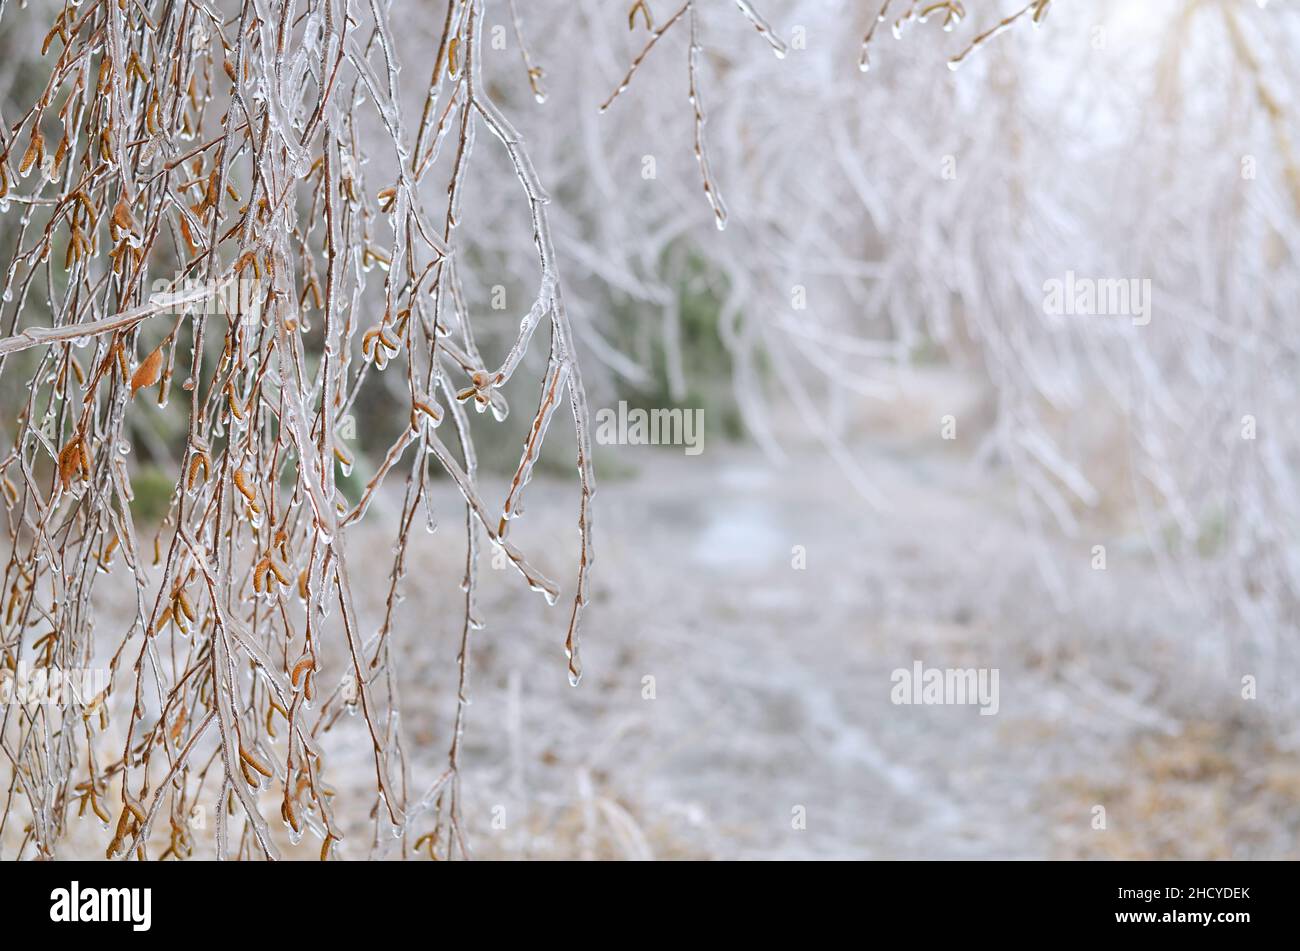 Birch branches covered in ice in the foreground after a winter ice storm. Aftermath of freezing rain. Stock Photo